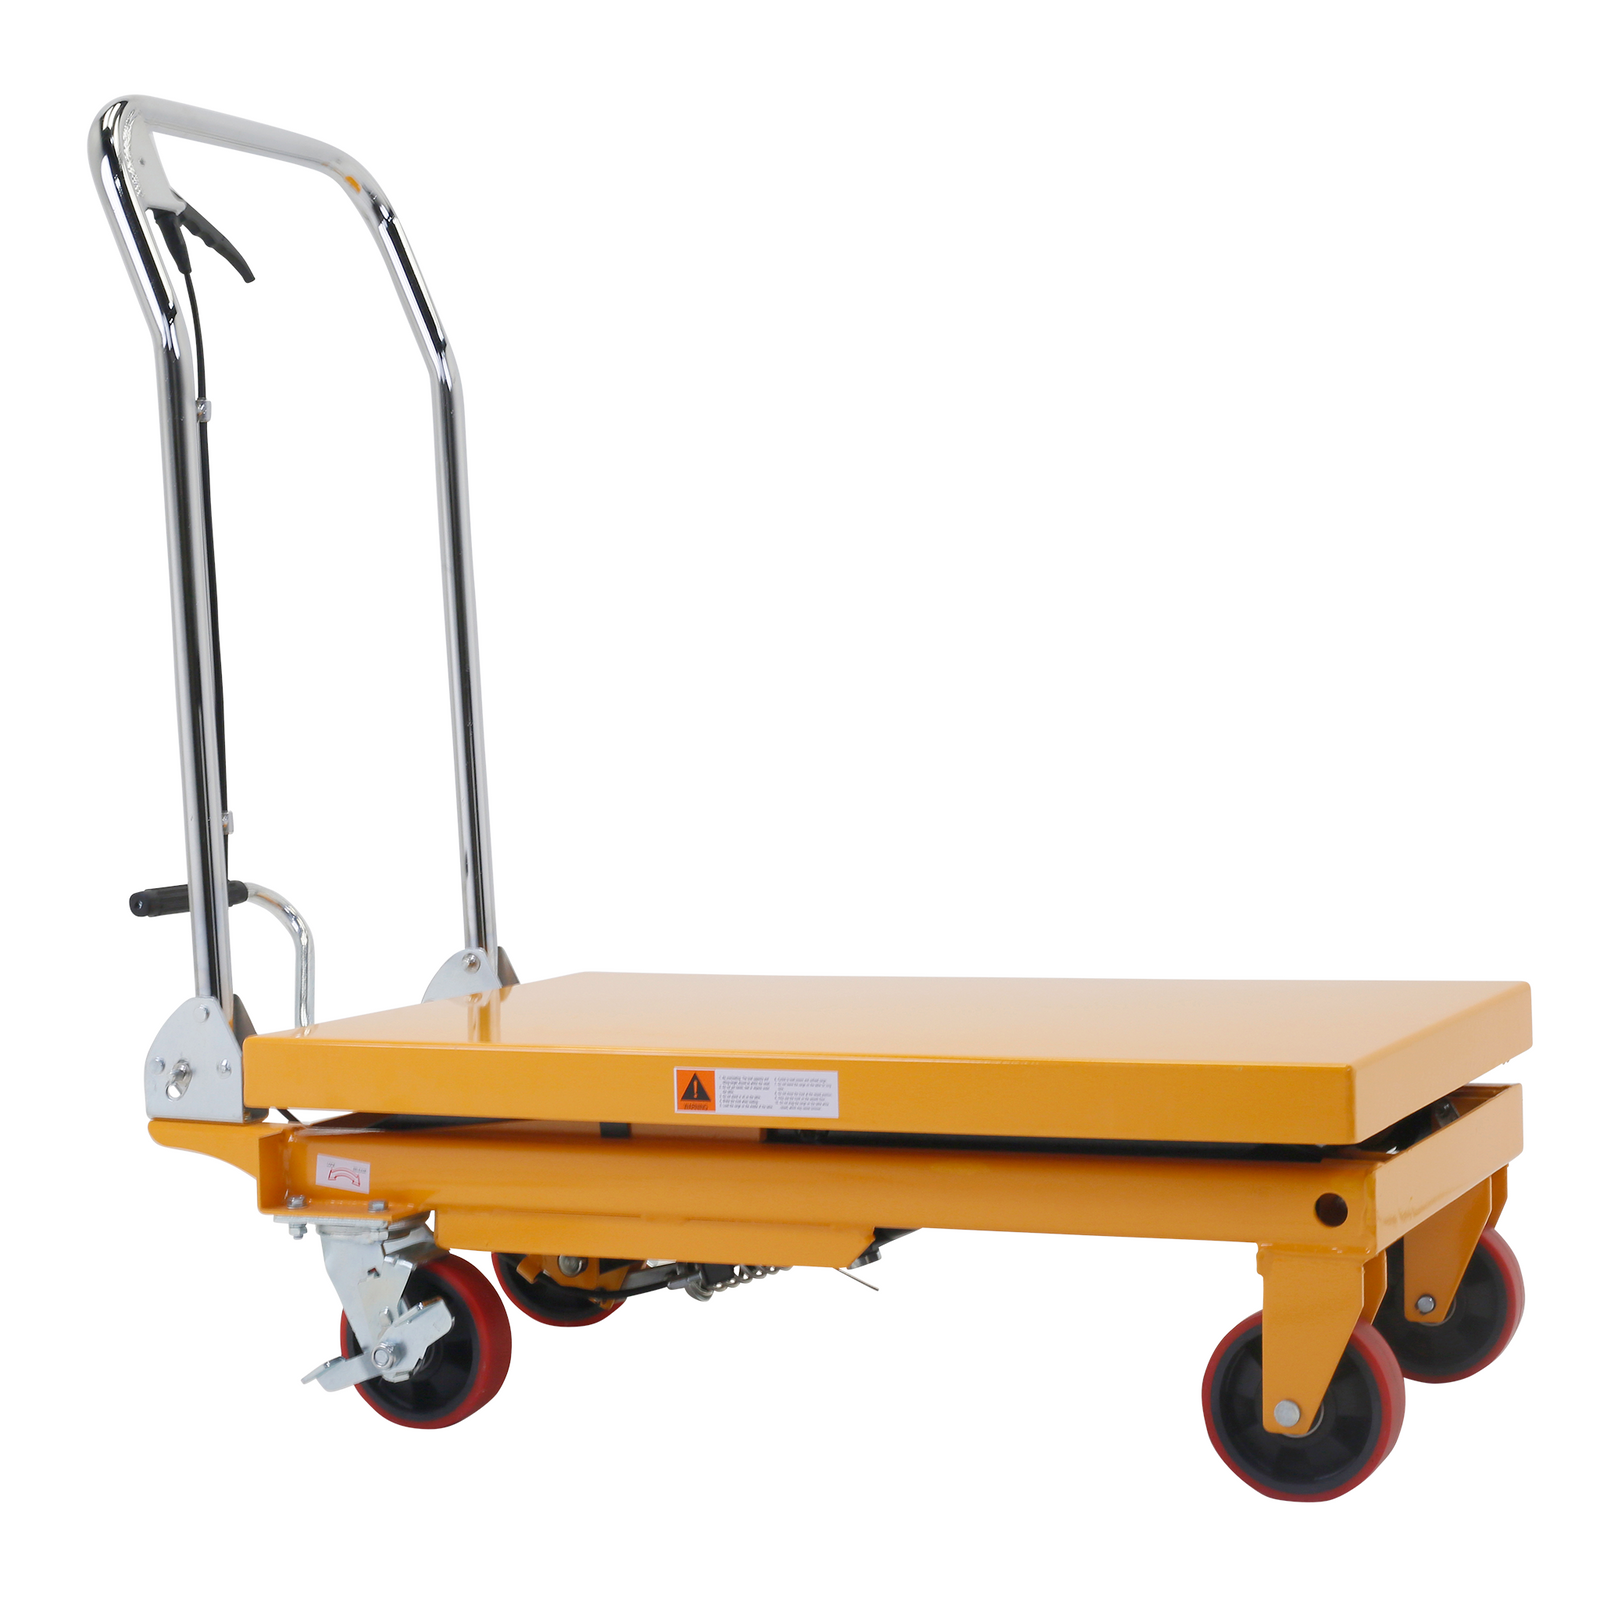 Diagonal view of a JORESTECH black and yellow hydraulic table lift for 300 Kg. The table is completely collapsed.